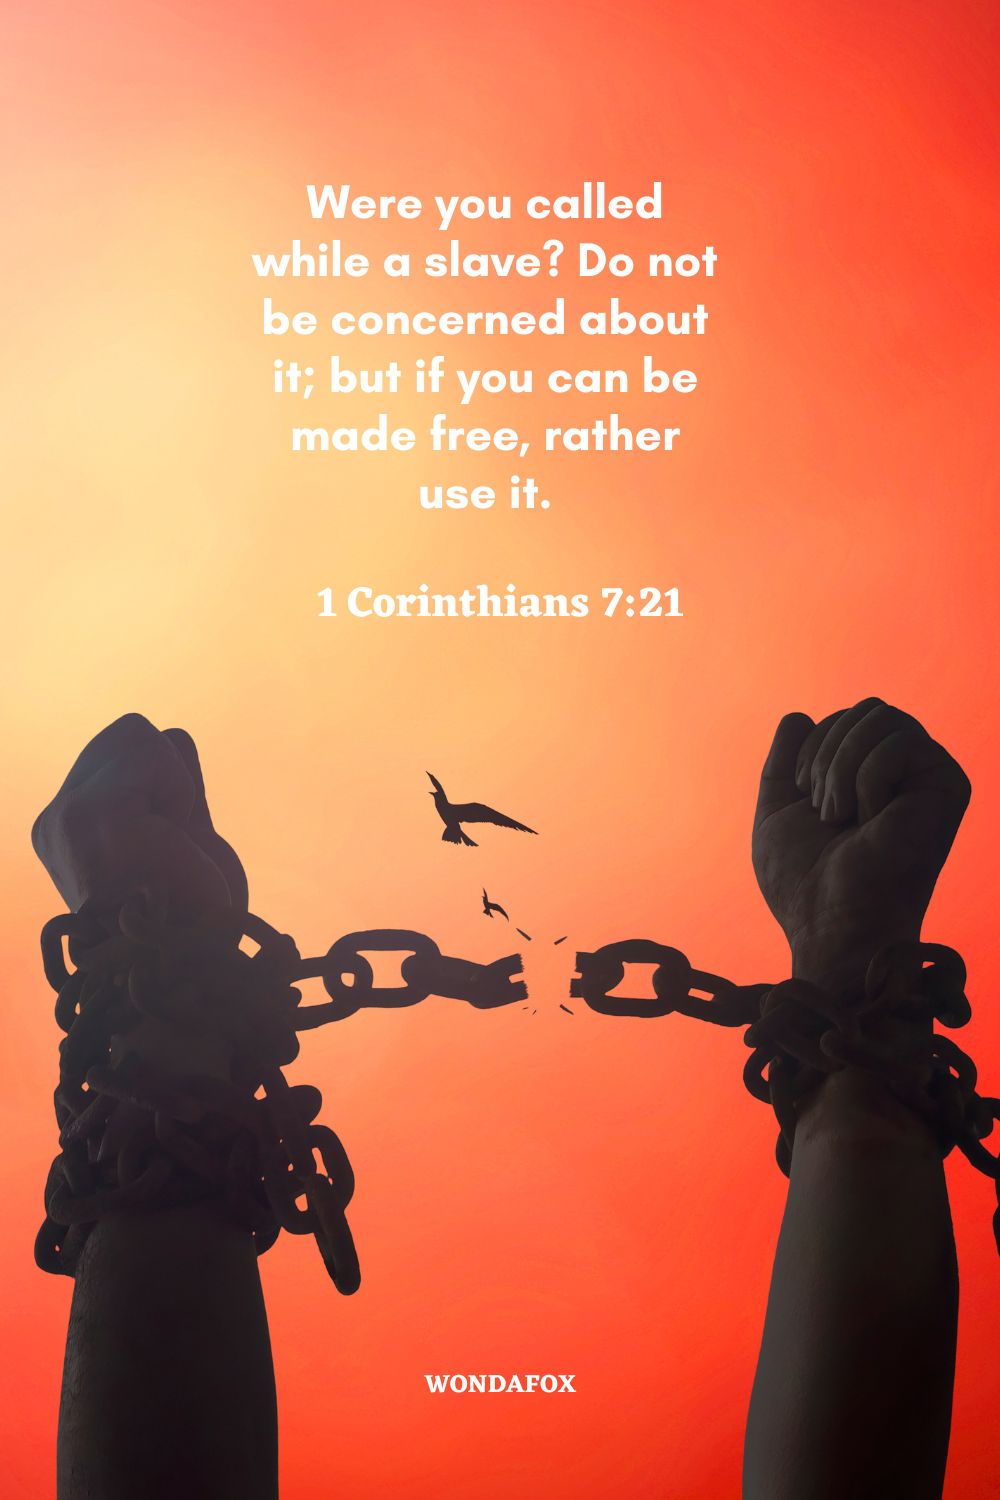 Were you called while a slave? Do not be concerned about it; but if you can be made free, rather use it.
1 Corinthians 7:21